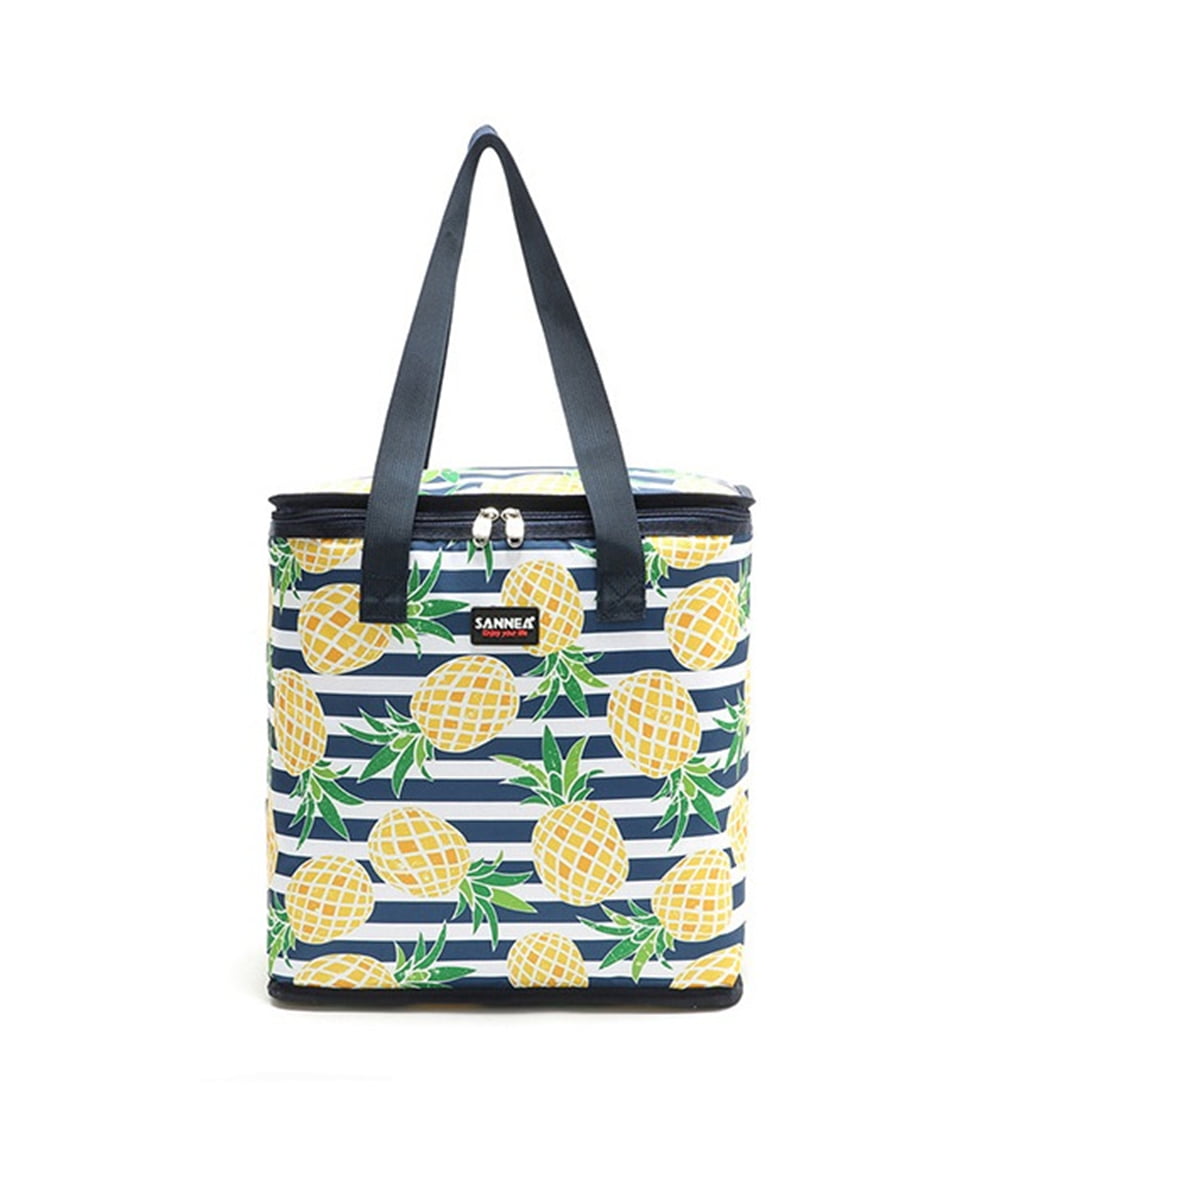 Insulated Reusable Grocery Bags - Heavy Duty Shopping Bag - Tote Cooler - Sturdy Zipper ...